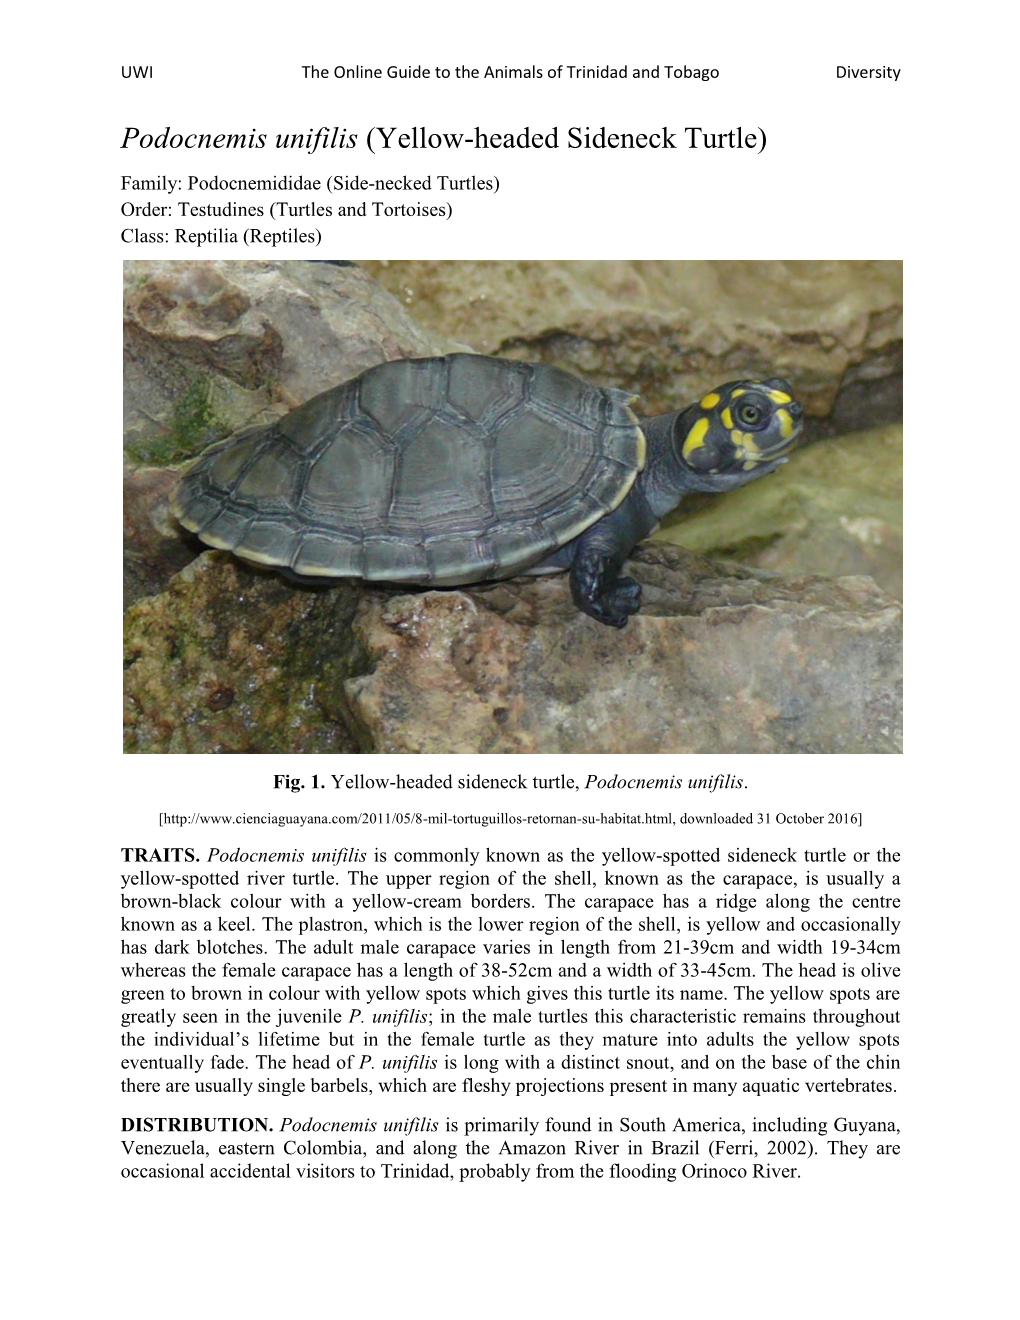 Podocnemis Unifilis (Yellow-Headed Sideneck Turtle) Family: Podocnemididae (Side-Necked Turtles) Order: Testudines (Turtles and Tortoises) Class: Reptilia (Reptiles)